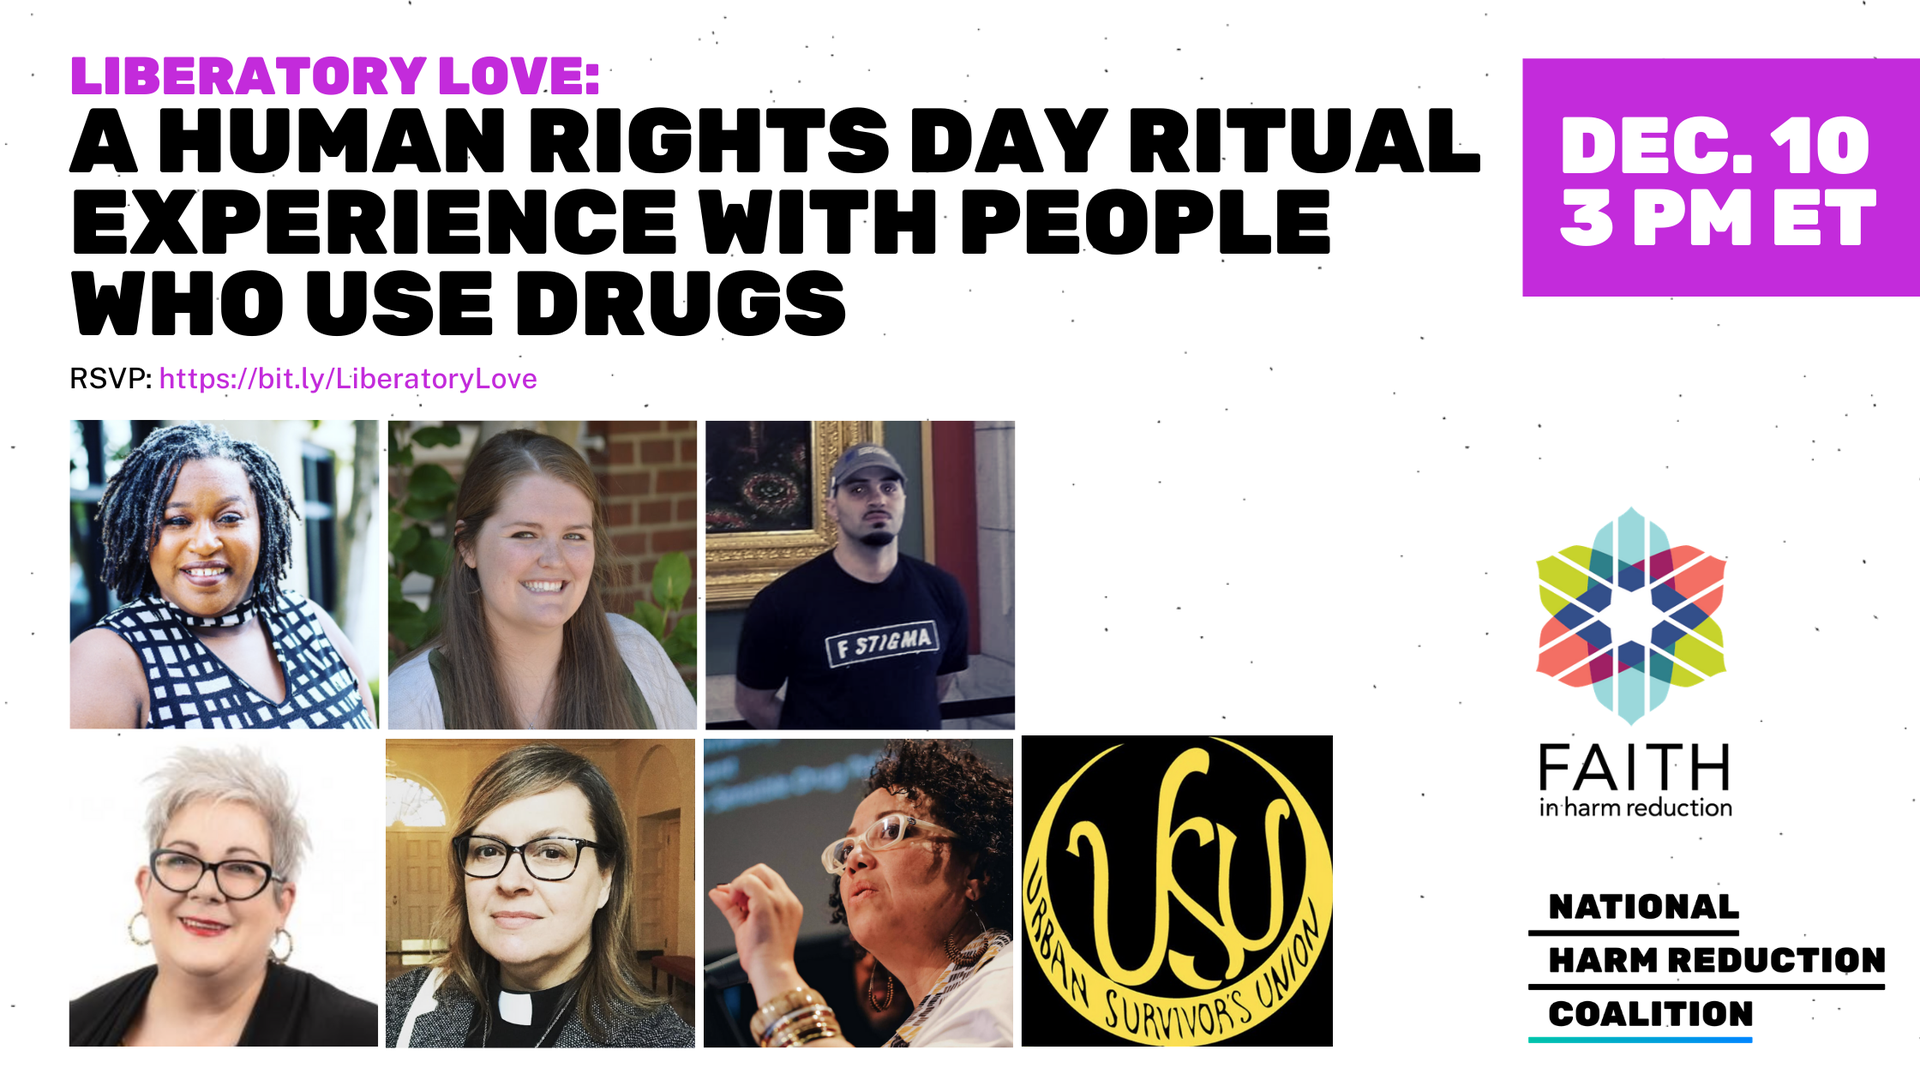 Liberatory Love: A Human Rights Day Experience with People Who Use Drugs